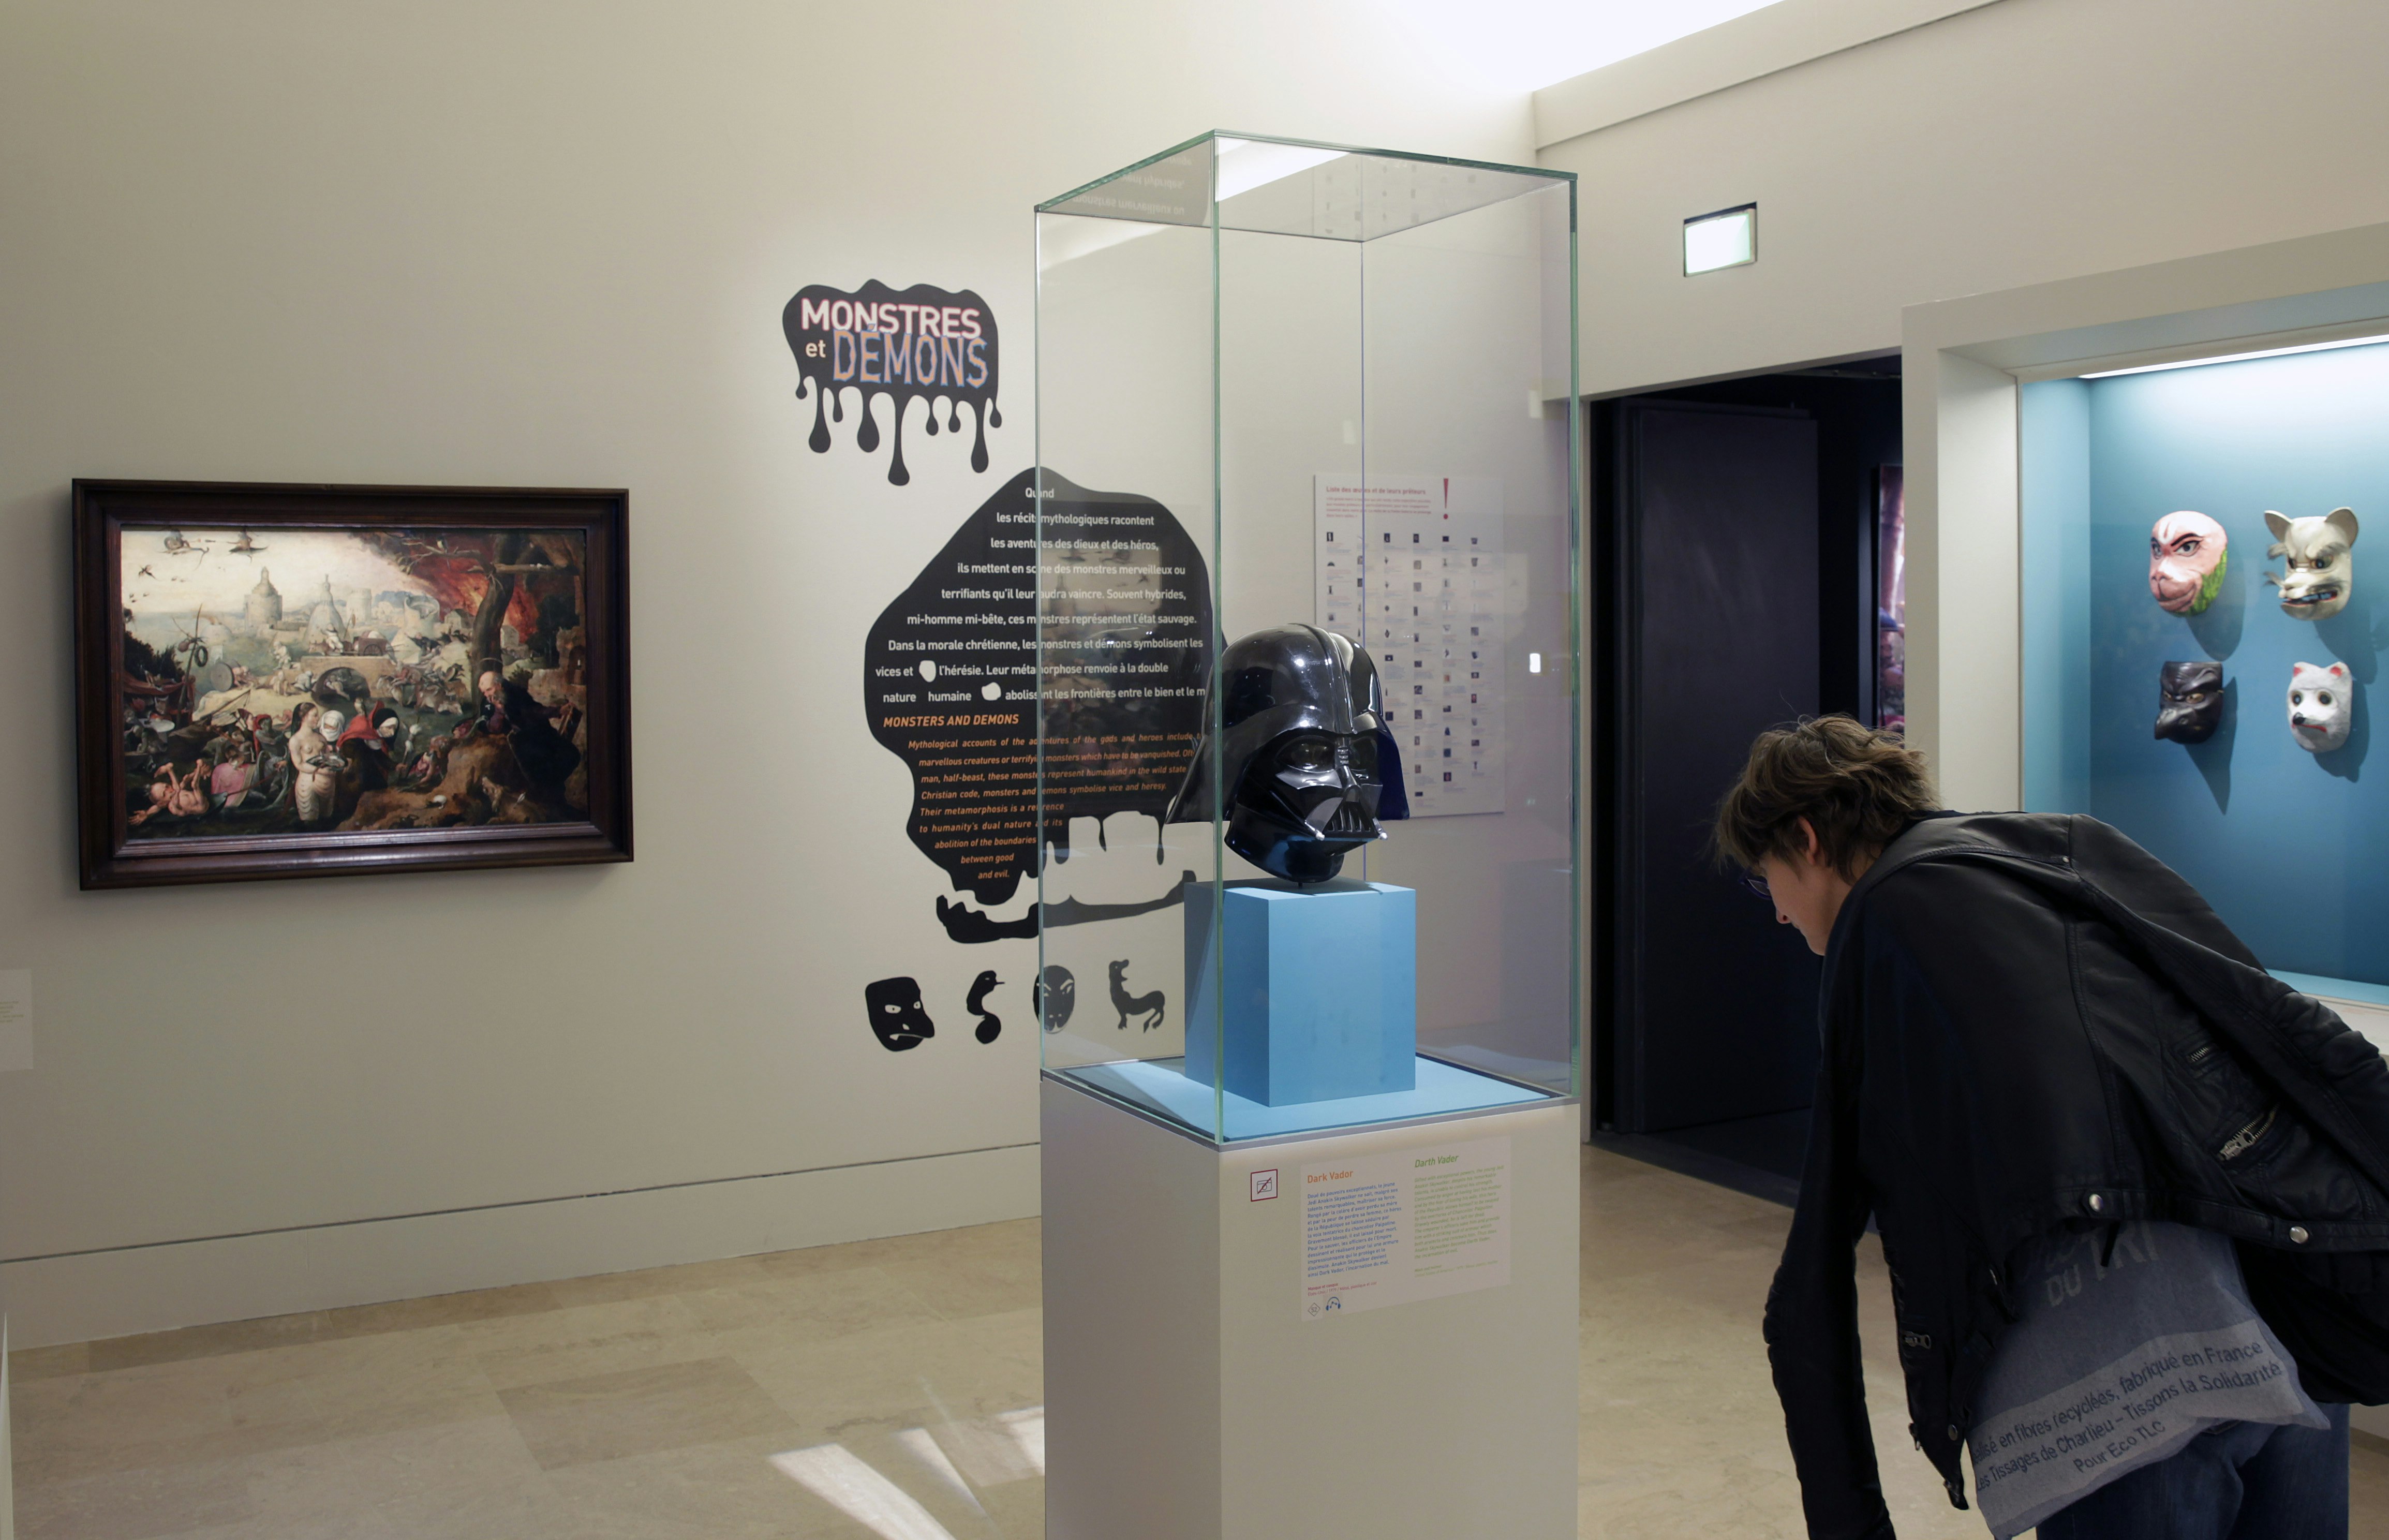 A black Darth Vader mask sits in a glass case in the Louvre's Petite Galerie